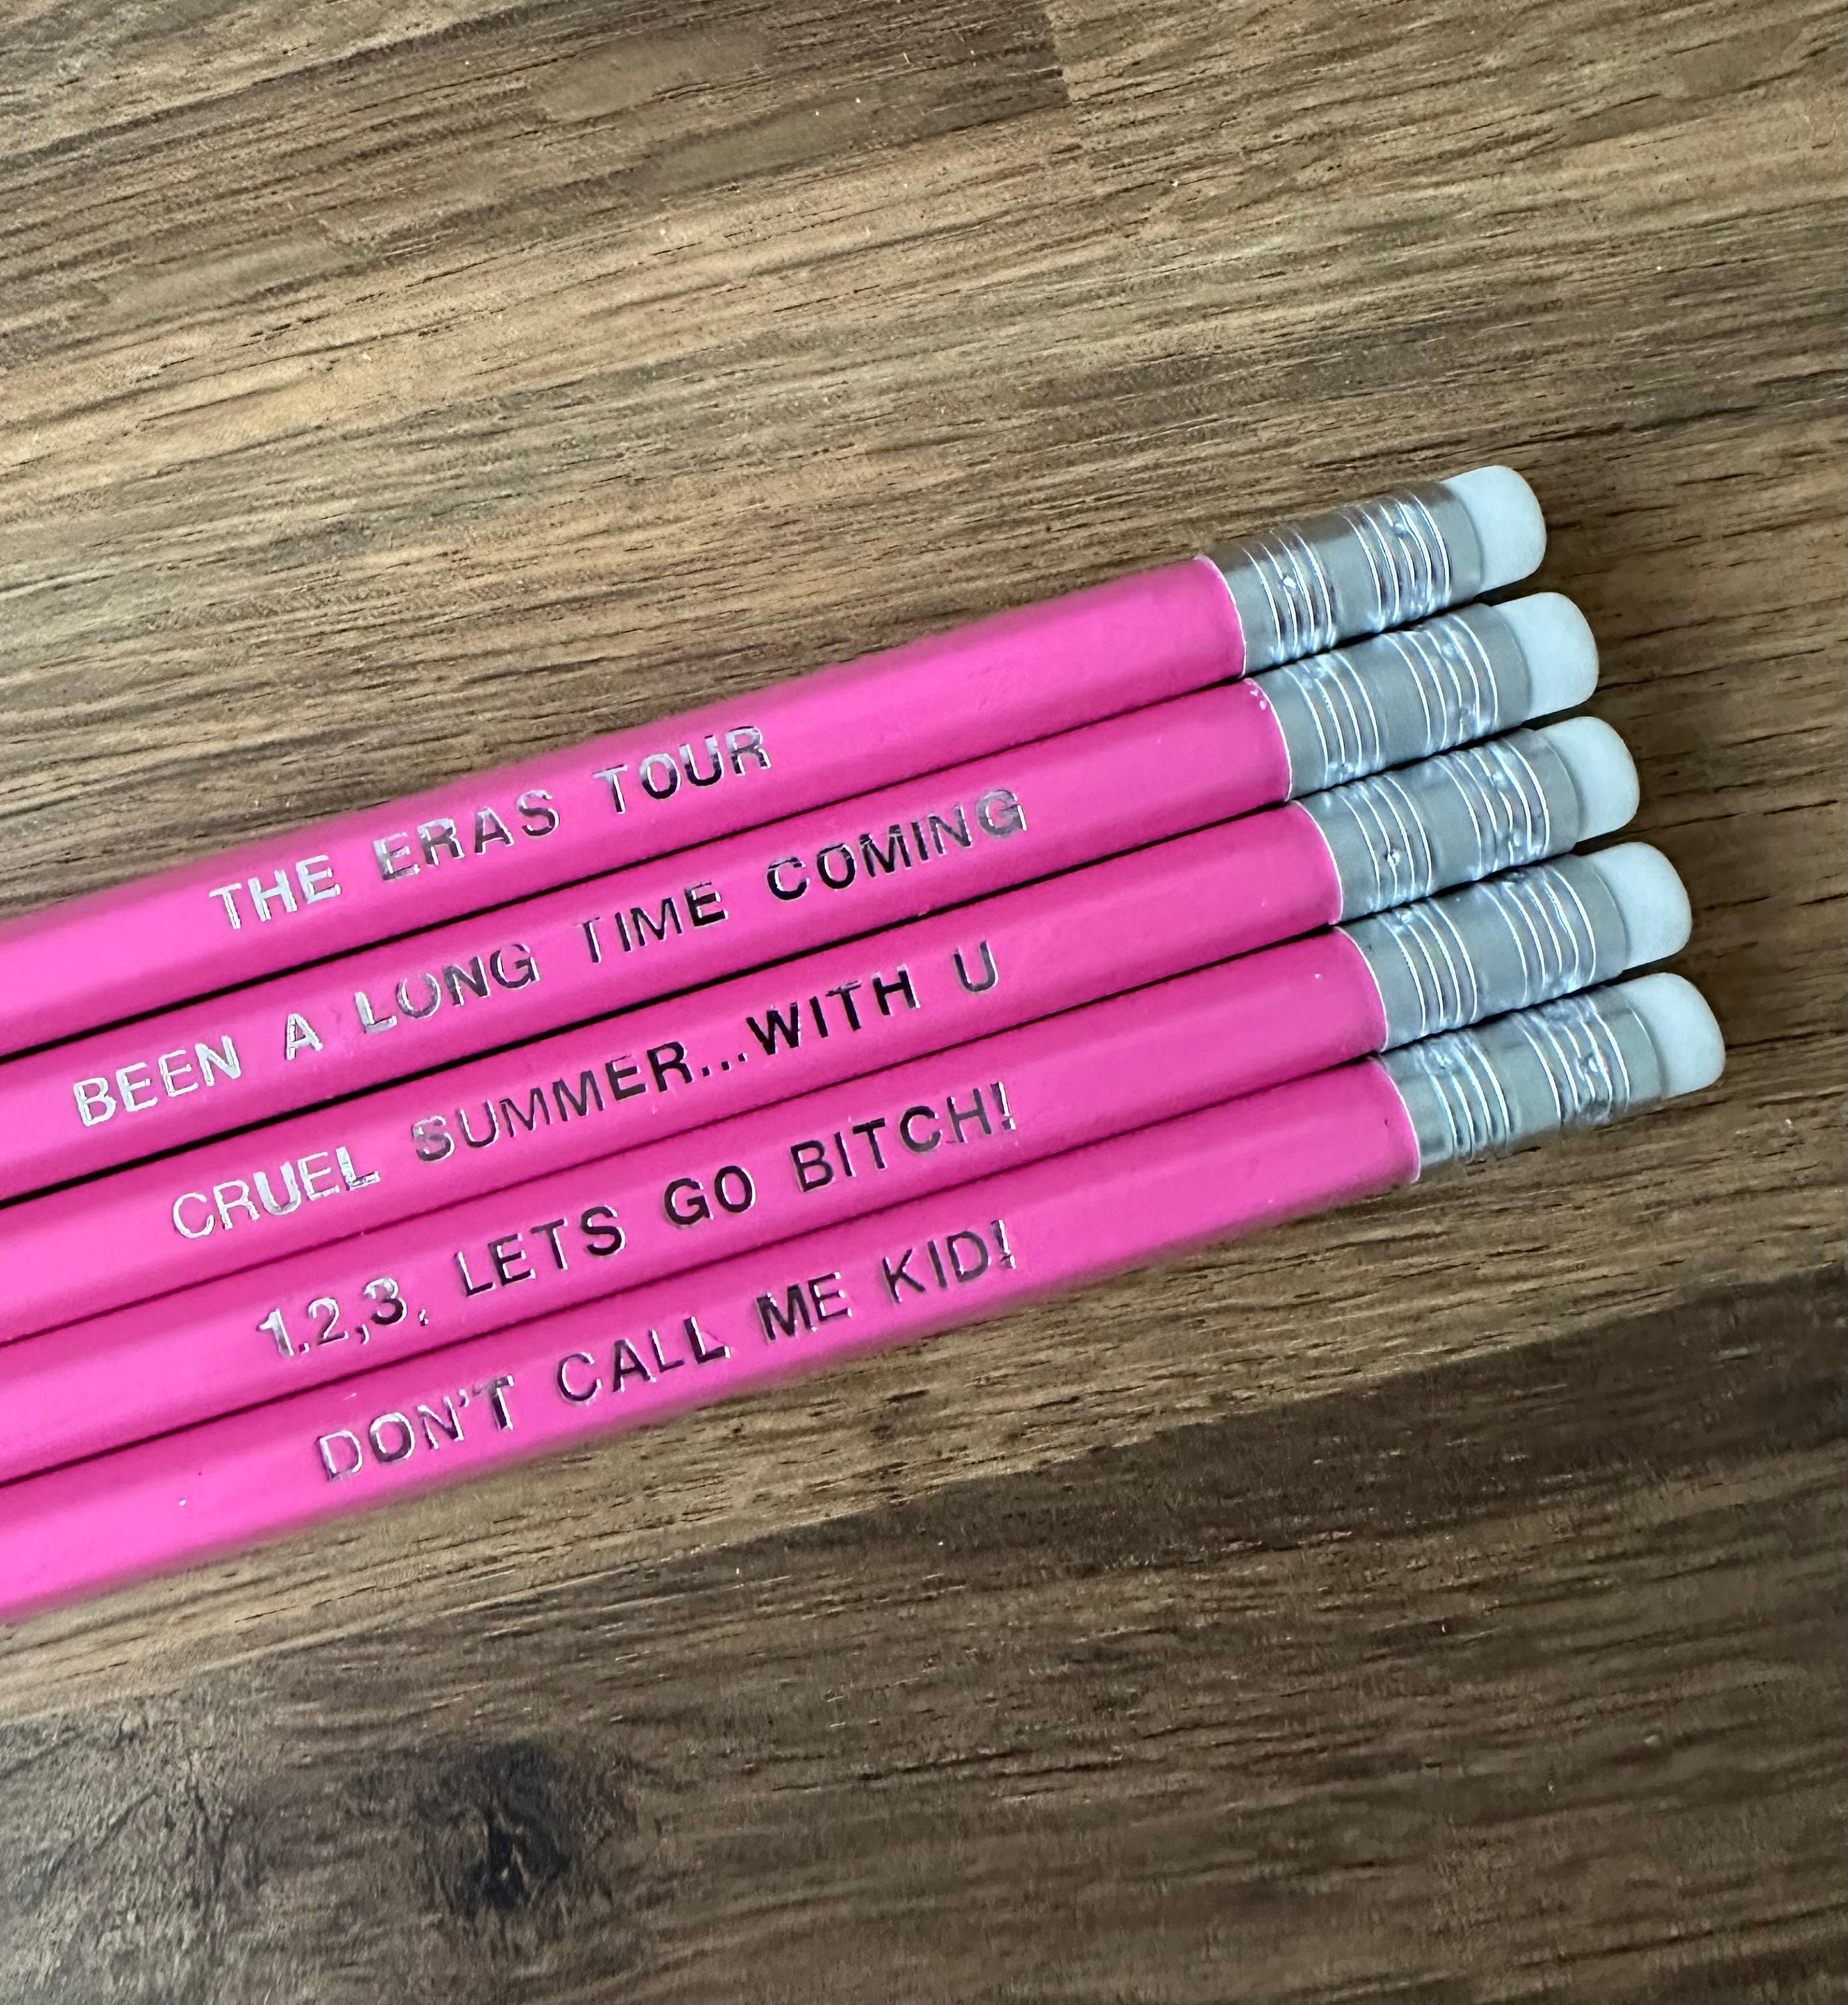 Taylor Swift Pencils Customised Pencils Inspired by Taylor Swift